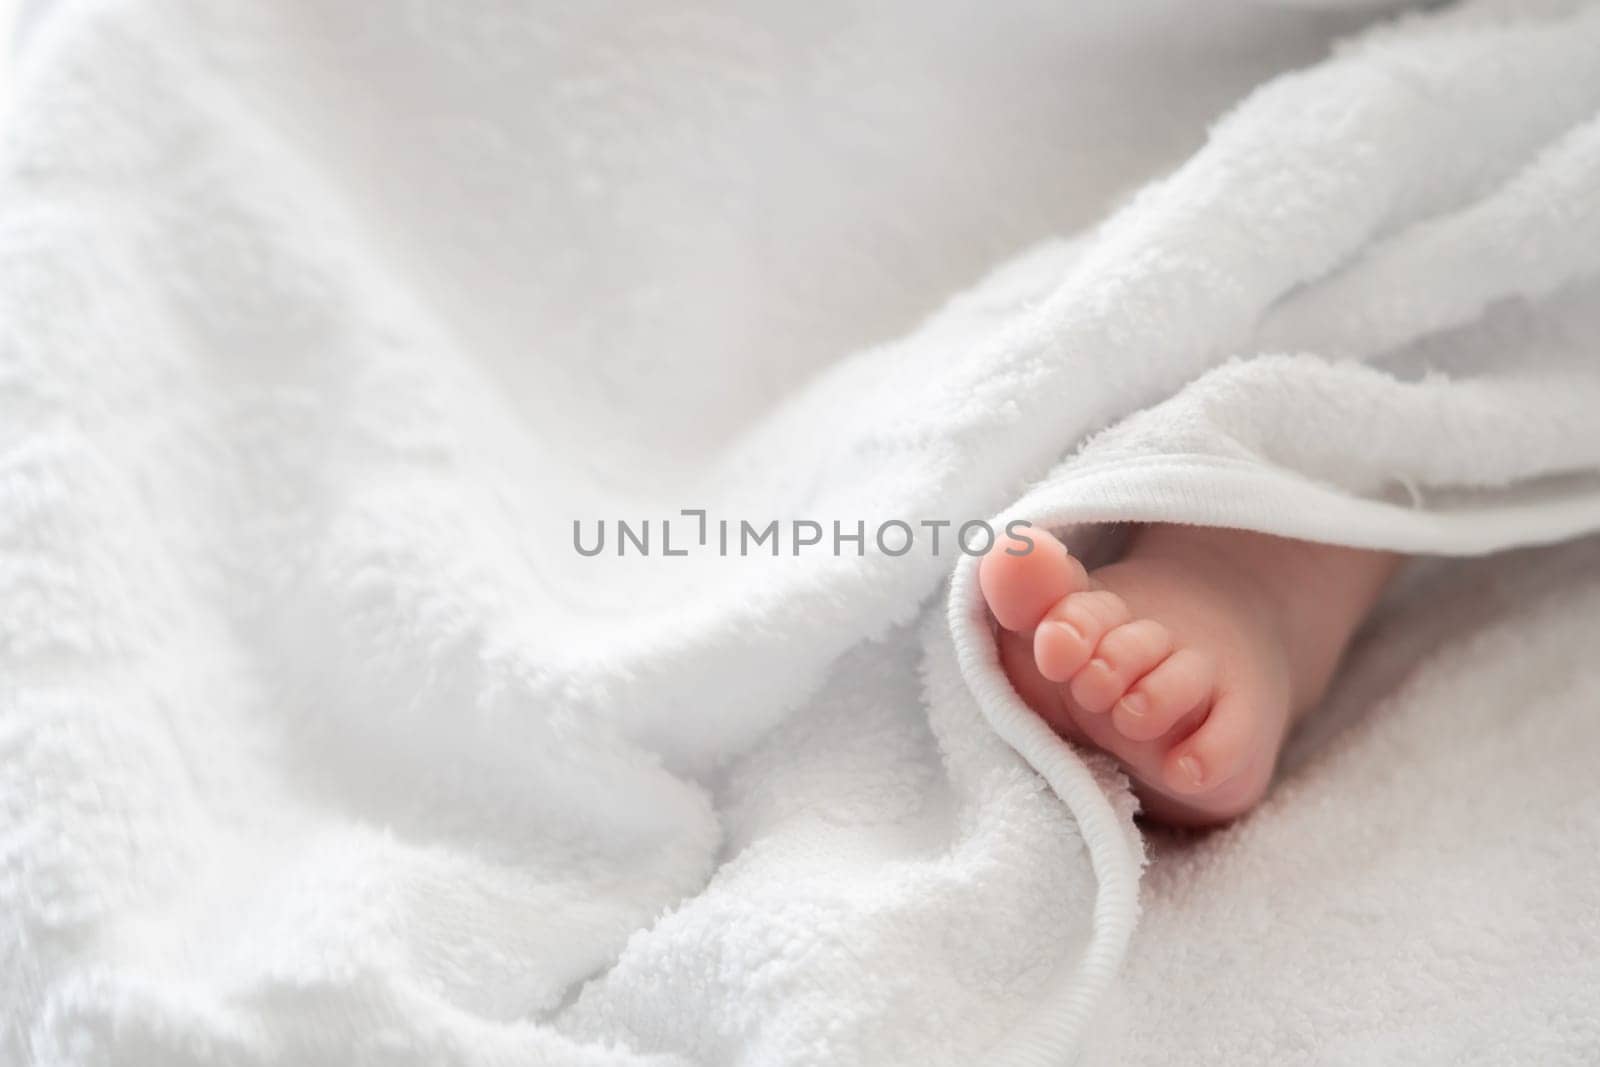 An endearing image showcasing the tiny foot of a baby, gracefully peeking out from the white embrace of a soft towel